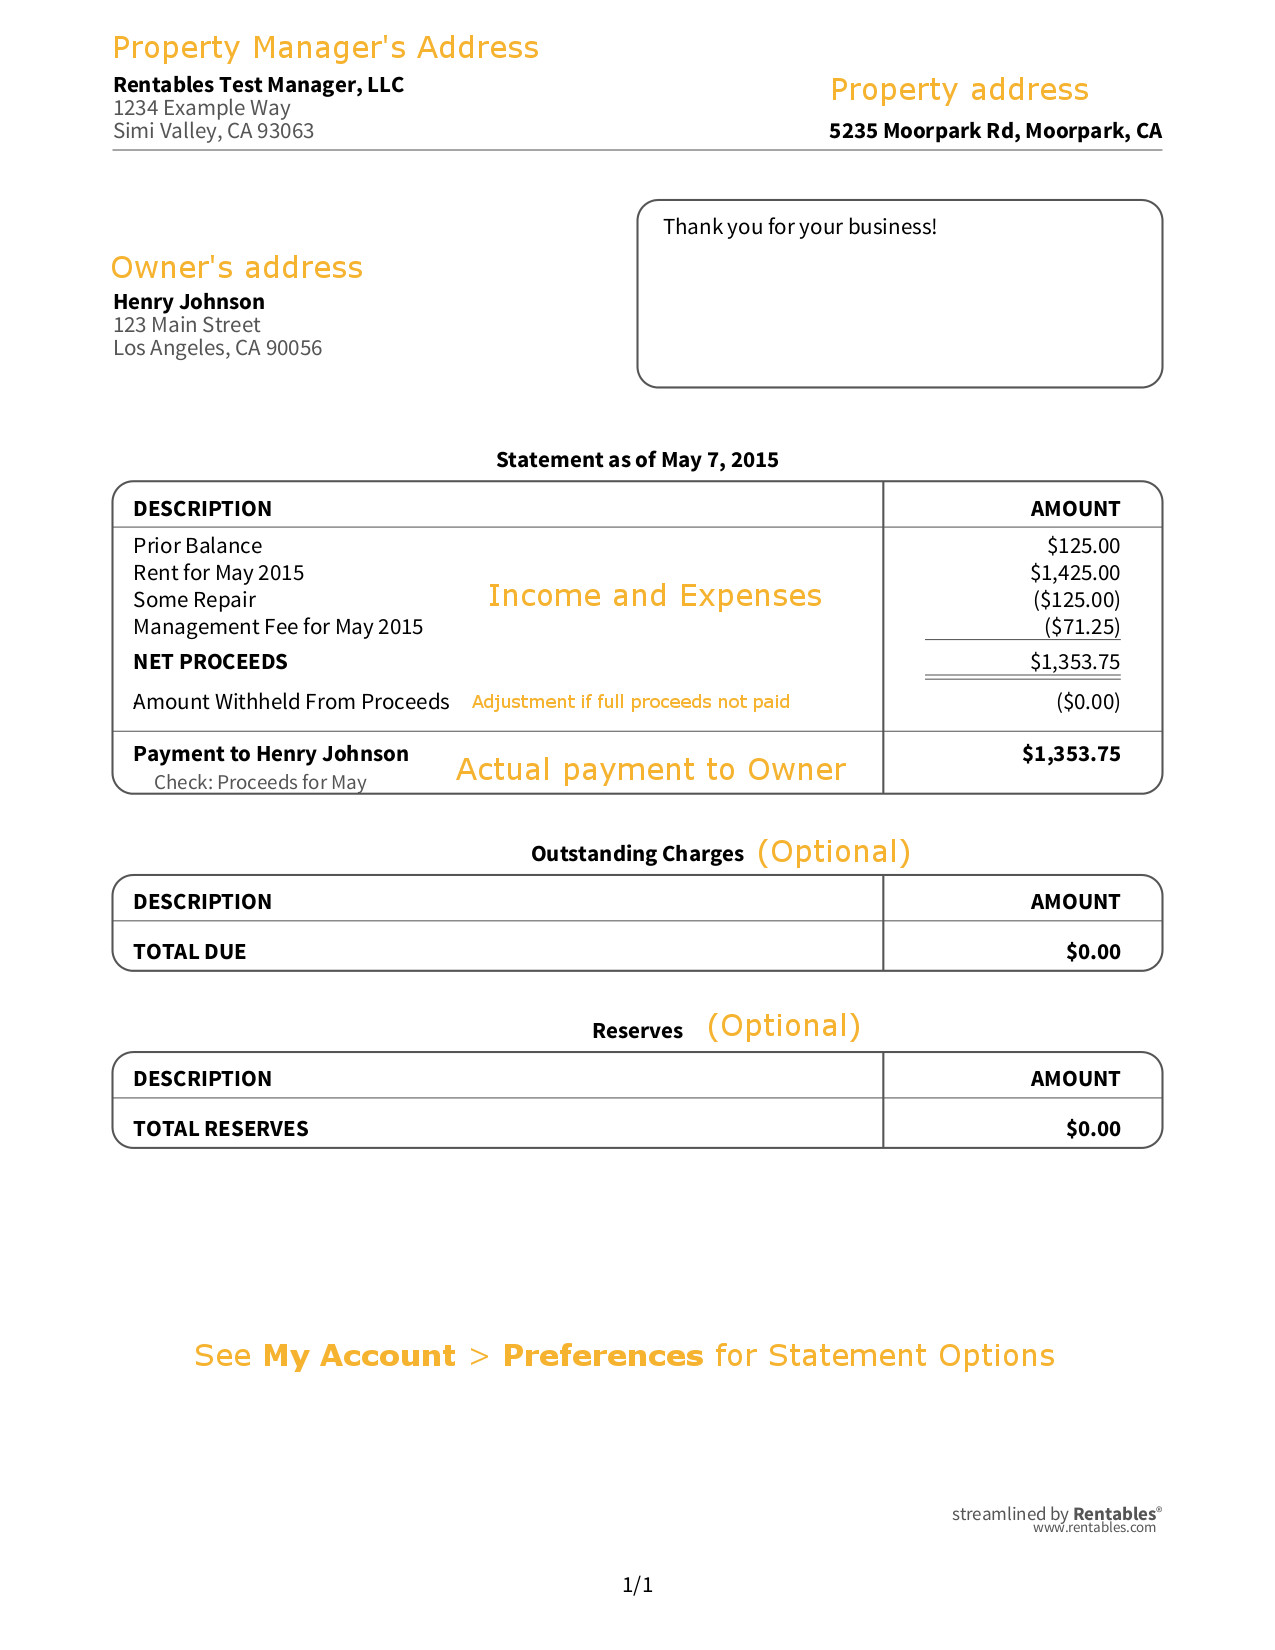 property management chart of accounts example